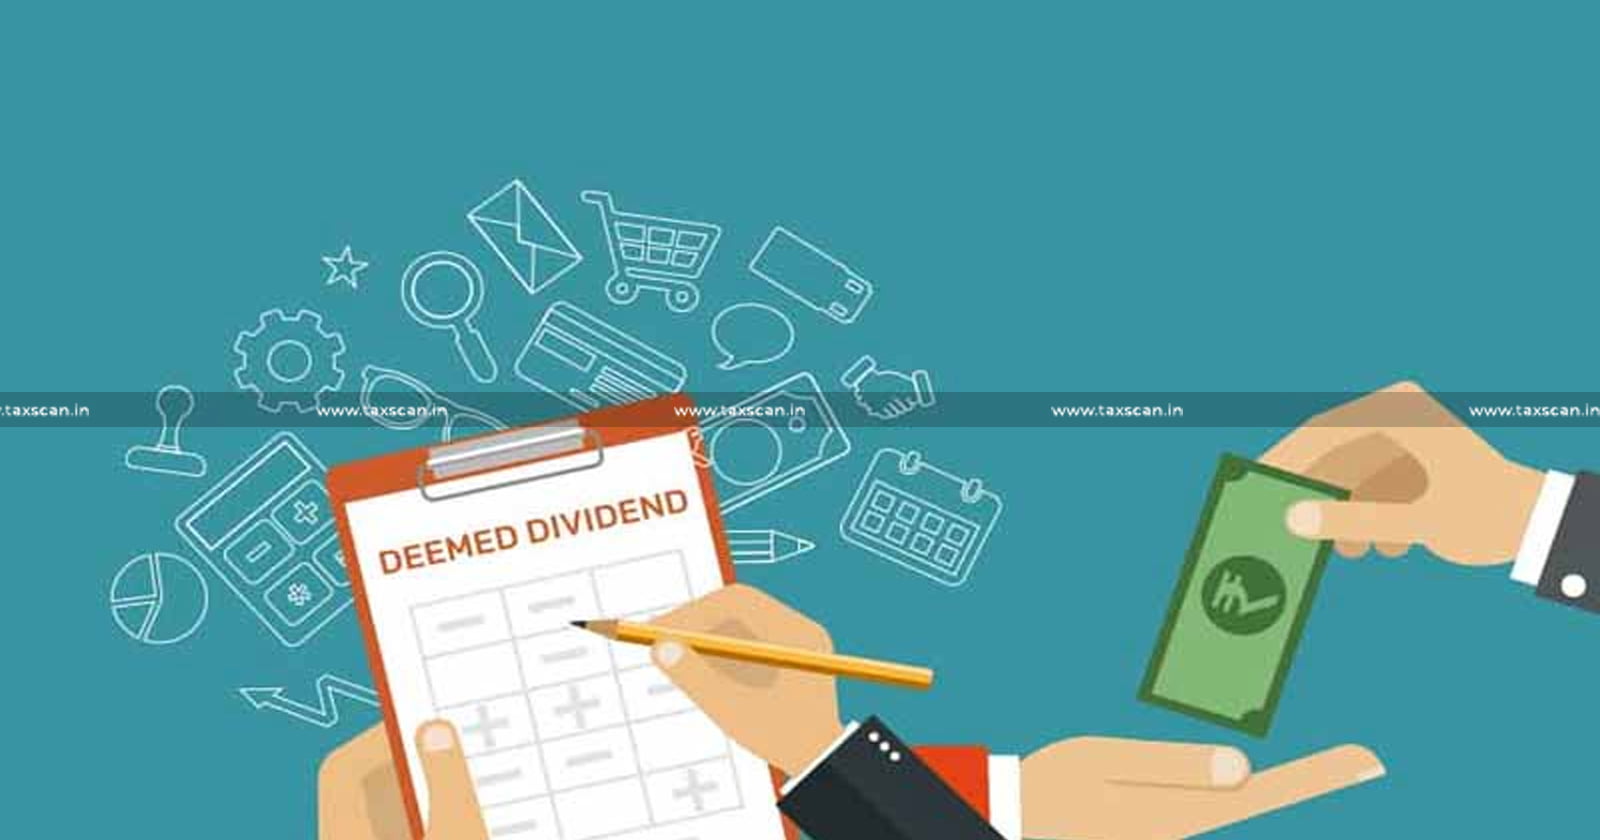 Deemed Dividend - Payment - Shareholder - Purchase Property - Gap Arrangement - Re-paid - ITAT - Income Tax - Tax - Taxscan